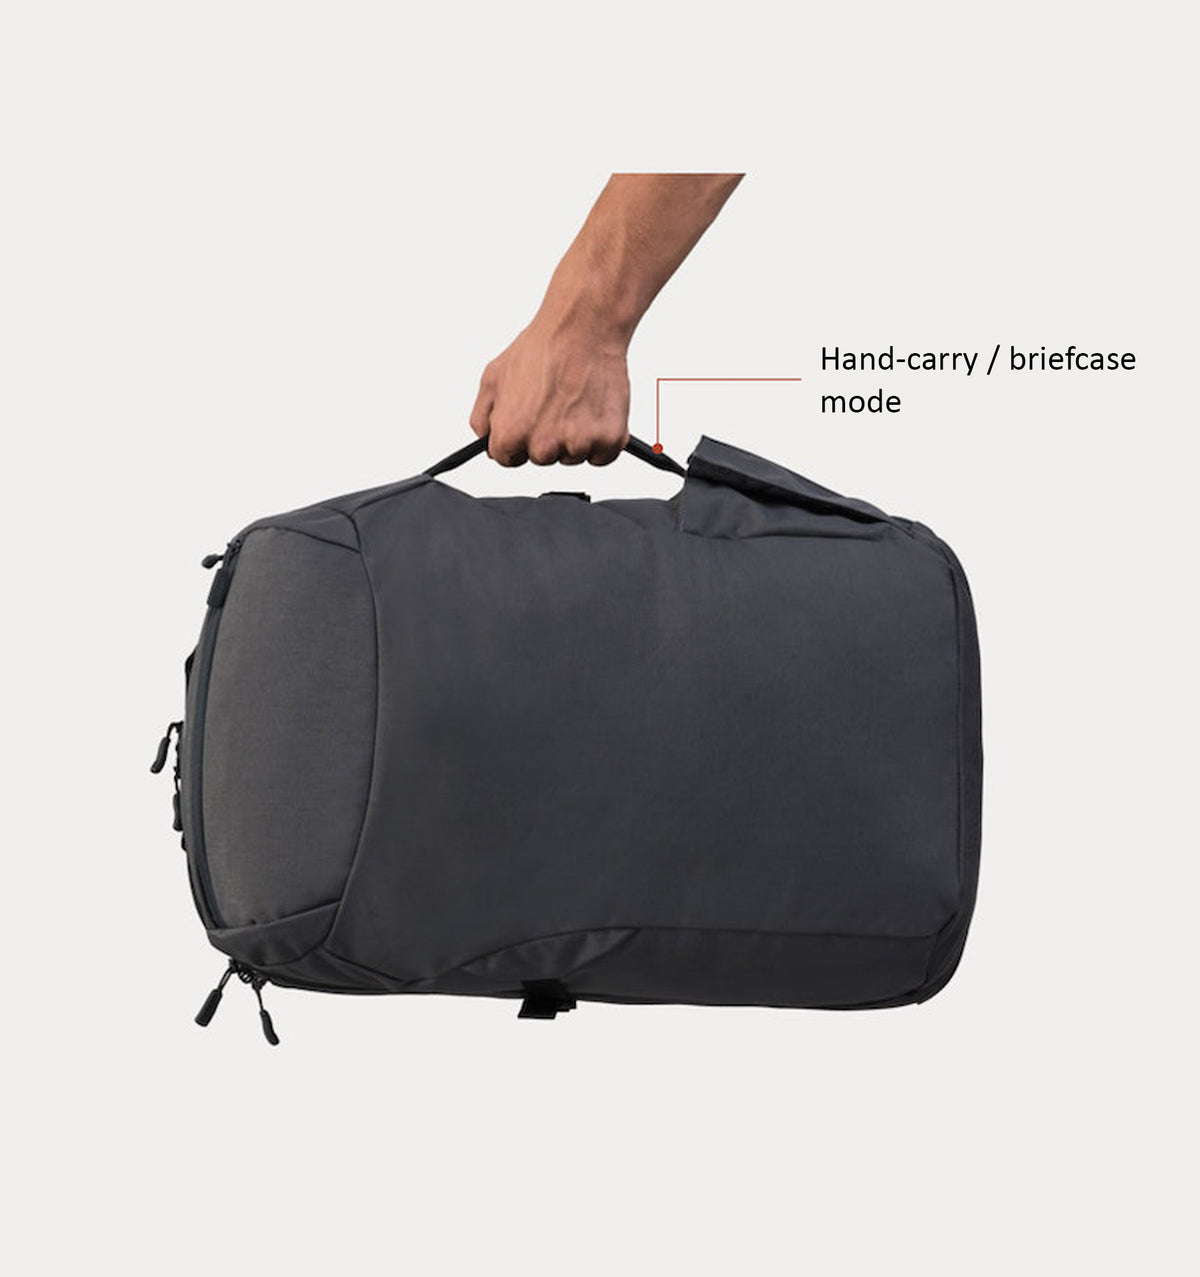 Minaal 16" Carry-on 3.0 Laptop Backpack 35L - Vancouver Grey